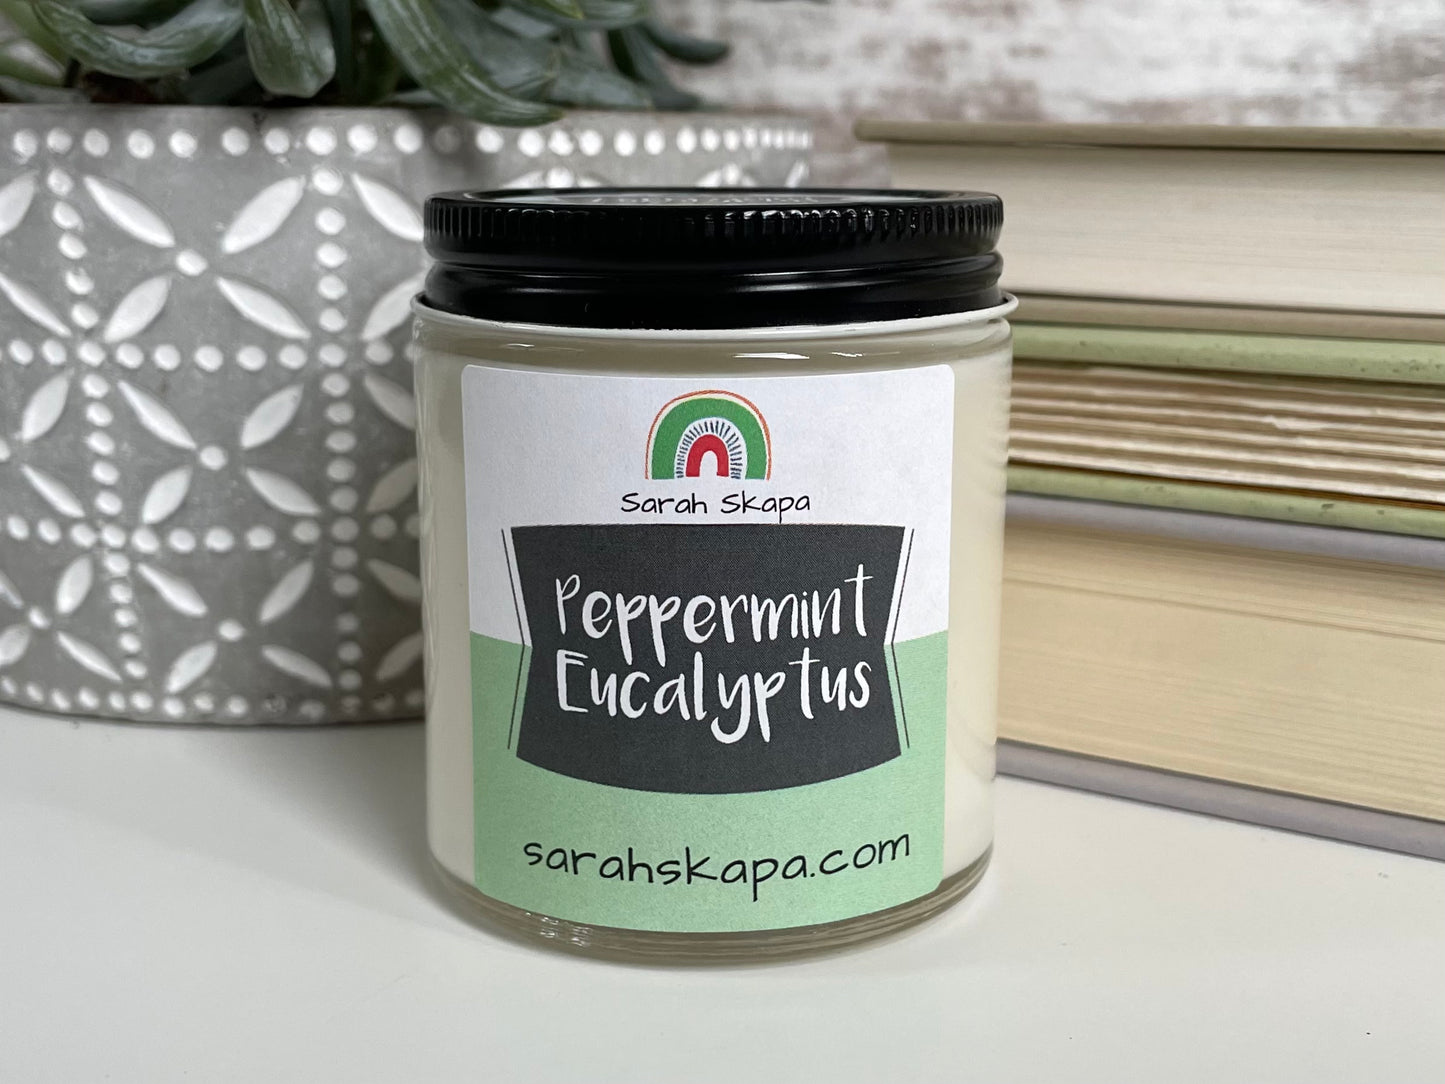 Peppermint Eucalyptus Small Jar Scented Soy Candle